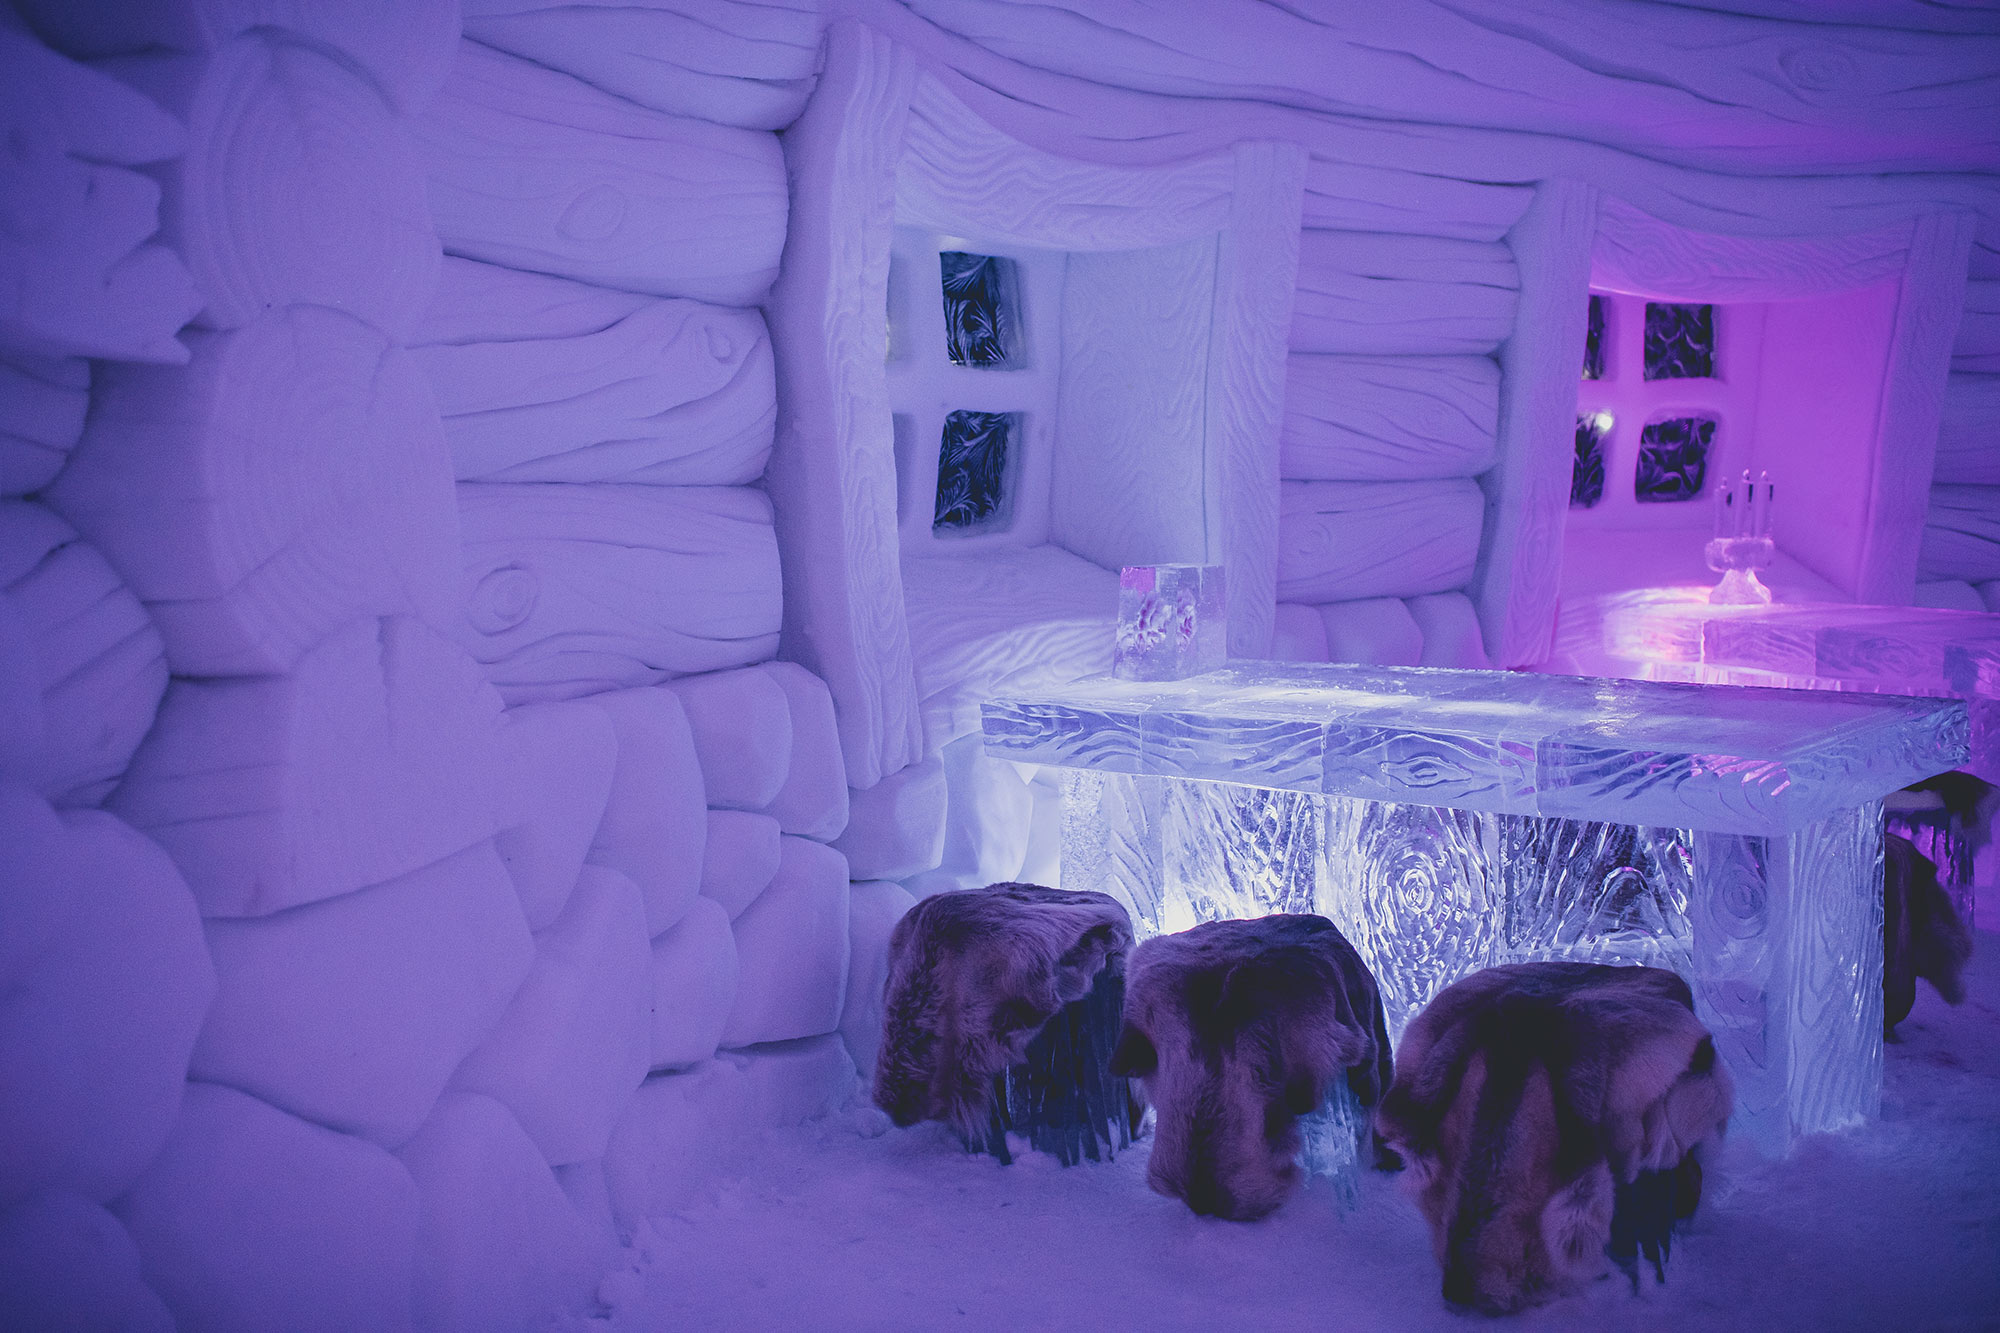 Room with walls and furniture made of ice